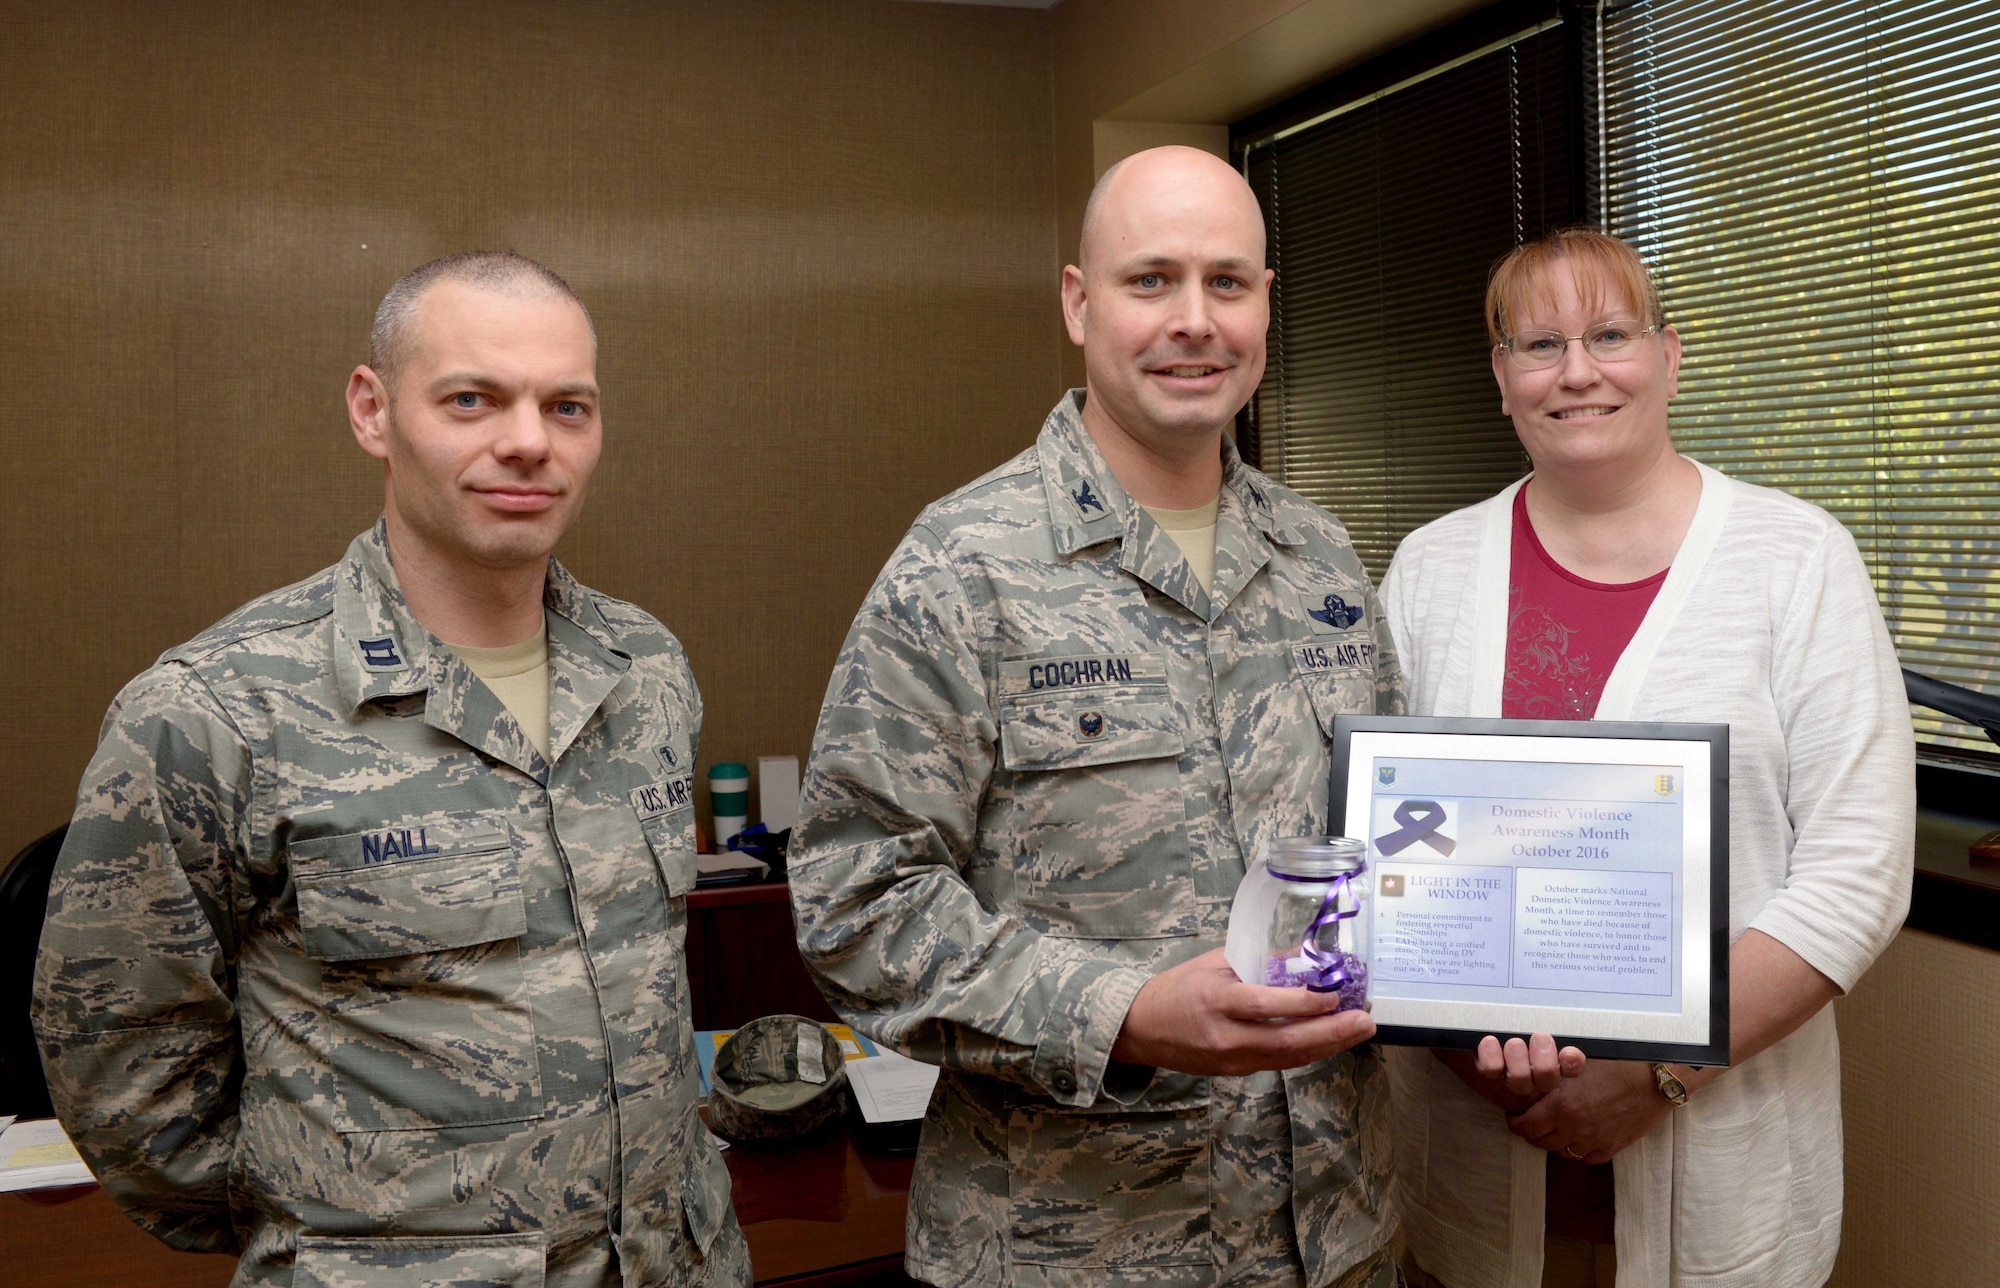 Kimberly Kohler, a family advocacy outreach manager assigned to the 28th Medical Group, right, and Capt. Timothy Naill, a family advocacy officer assigned to the 28th MDG, left, present Col. Bradley Cochran, vice commander of the 28th Bomb Wing, center, with a candle as a part of Domestic Violence Awareness Month at Ellsworth Air Force Base, S.D., Sept. 26, 2016. October is National Domestic Violence Awareness Month, a time to remember those who have lost their lives to domestic violence and honor those who have survived. (U.S. Air Force photo by Airman 1st Class Donald C. Knechtel)